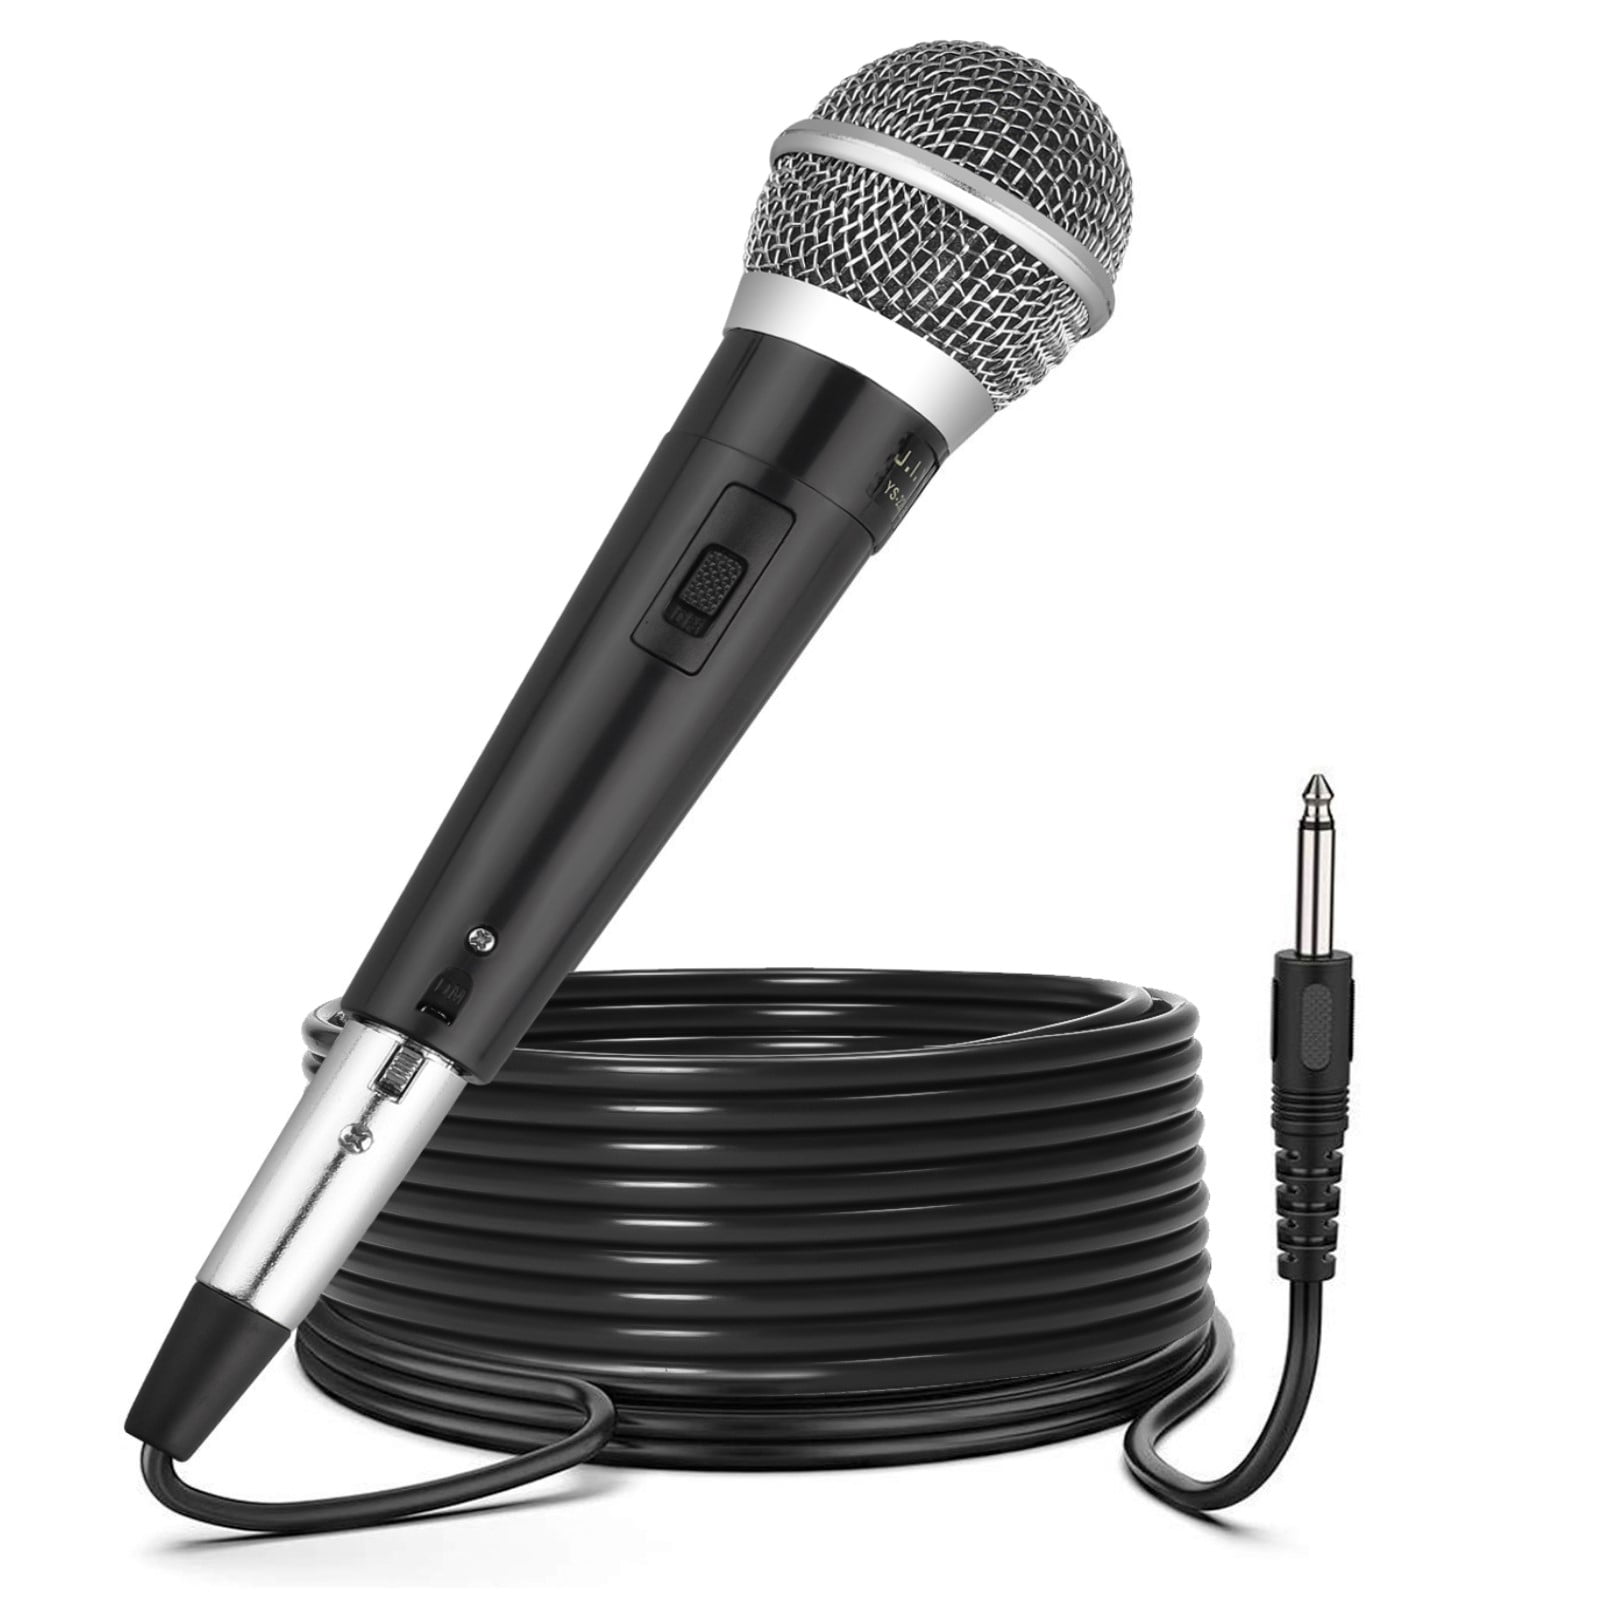 Wired Dynamic Karaoke Microphones with 6.35mm 10ft Audio Cable for Stage Karaoke Speech Wedding Indoor Outdoor Use 